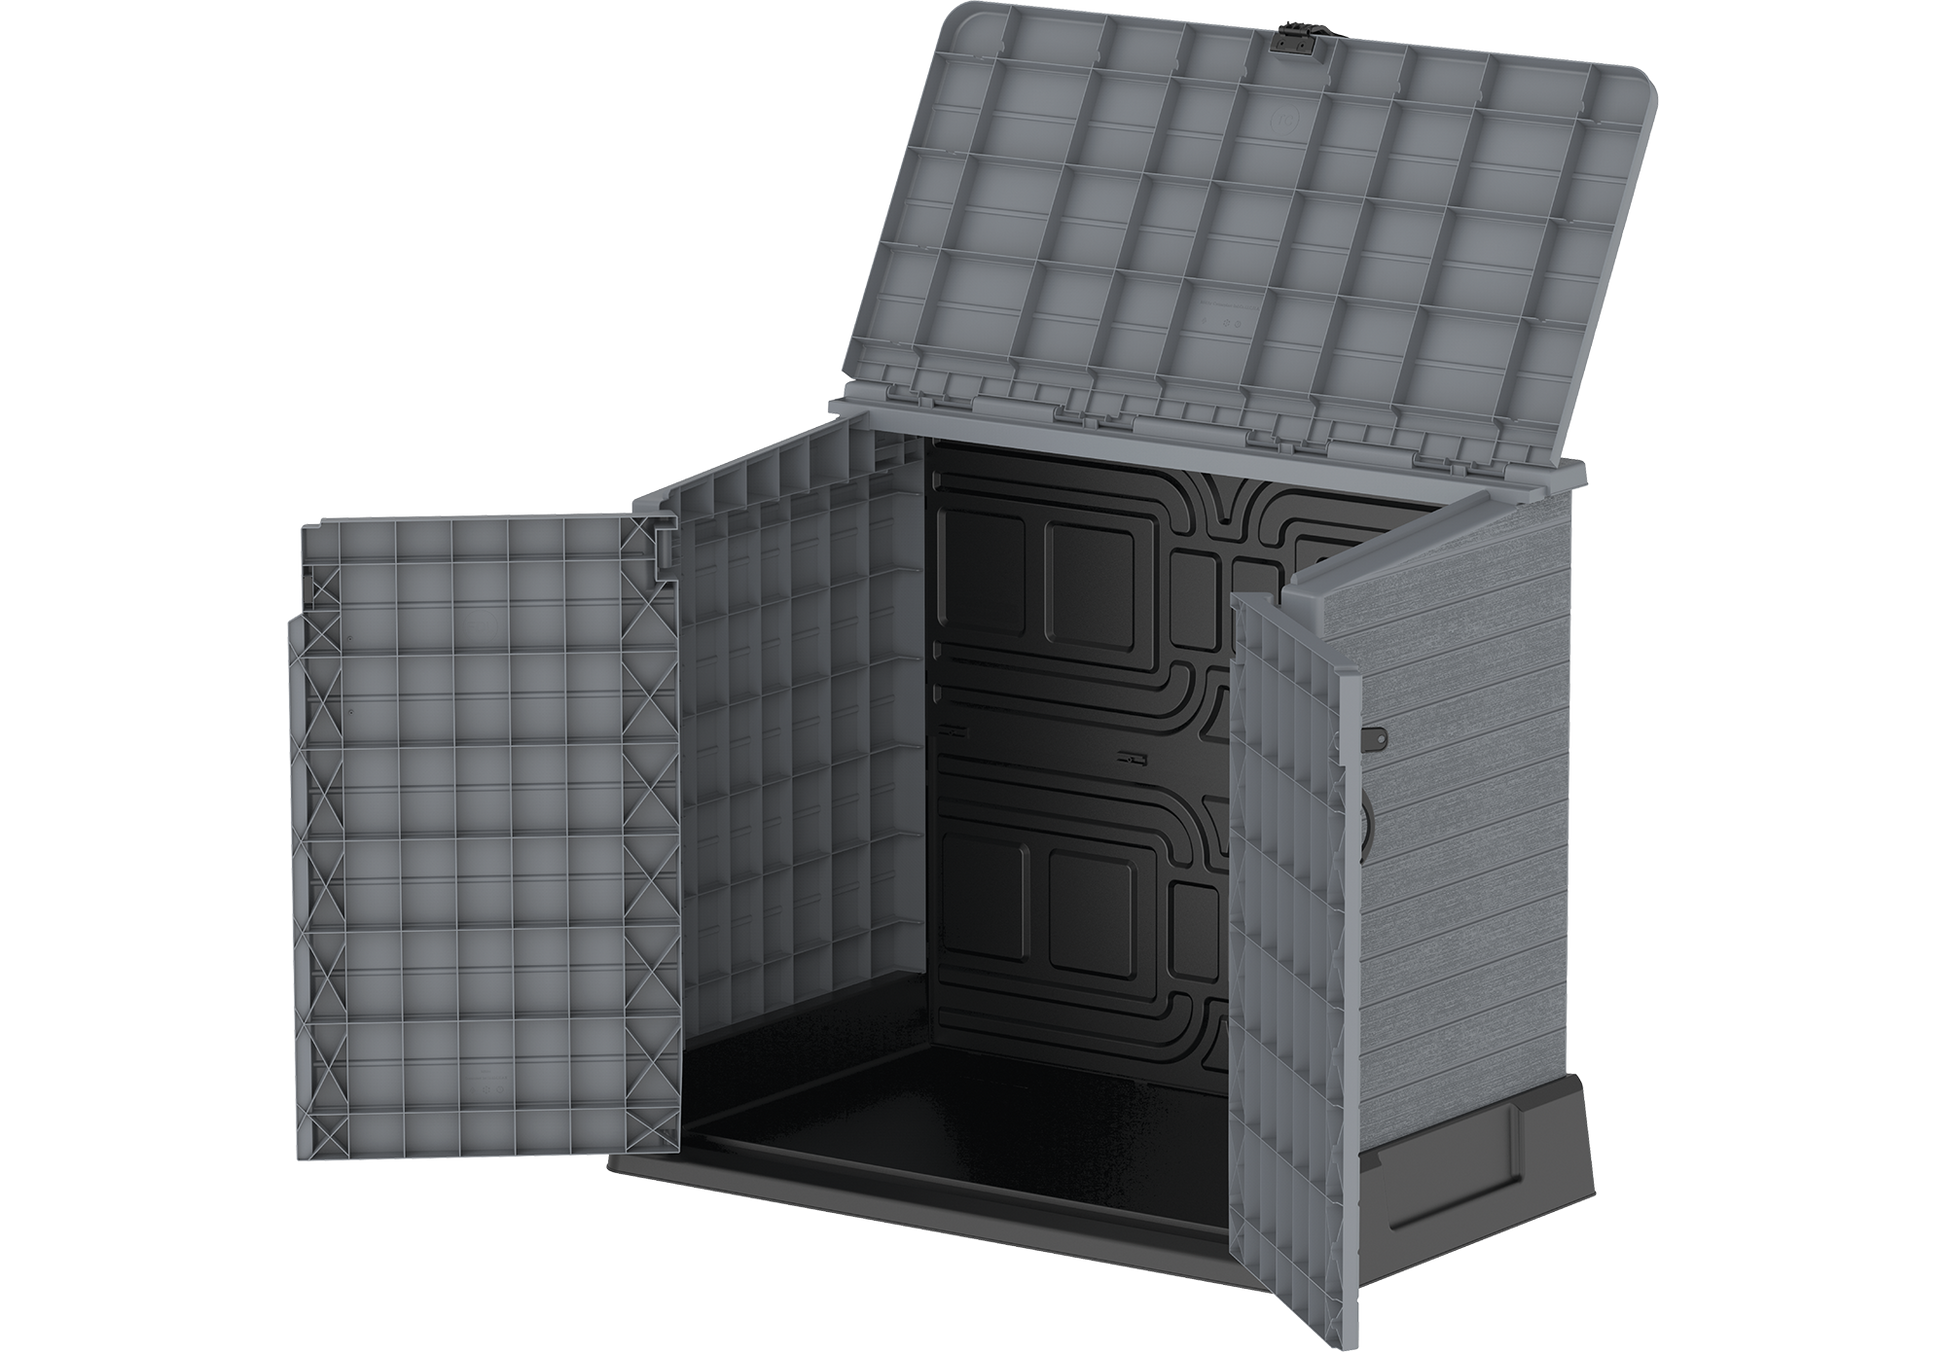 Outdoor Storage Small Shed- Cosmoplast KSA